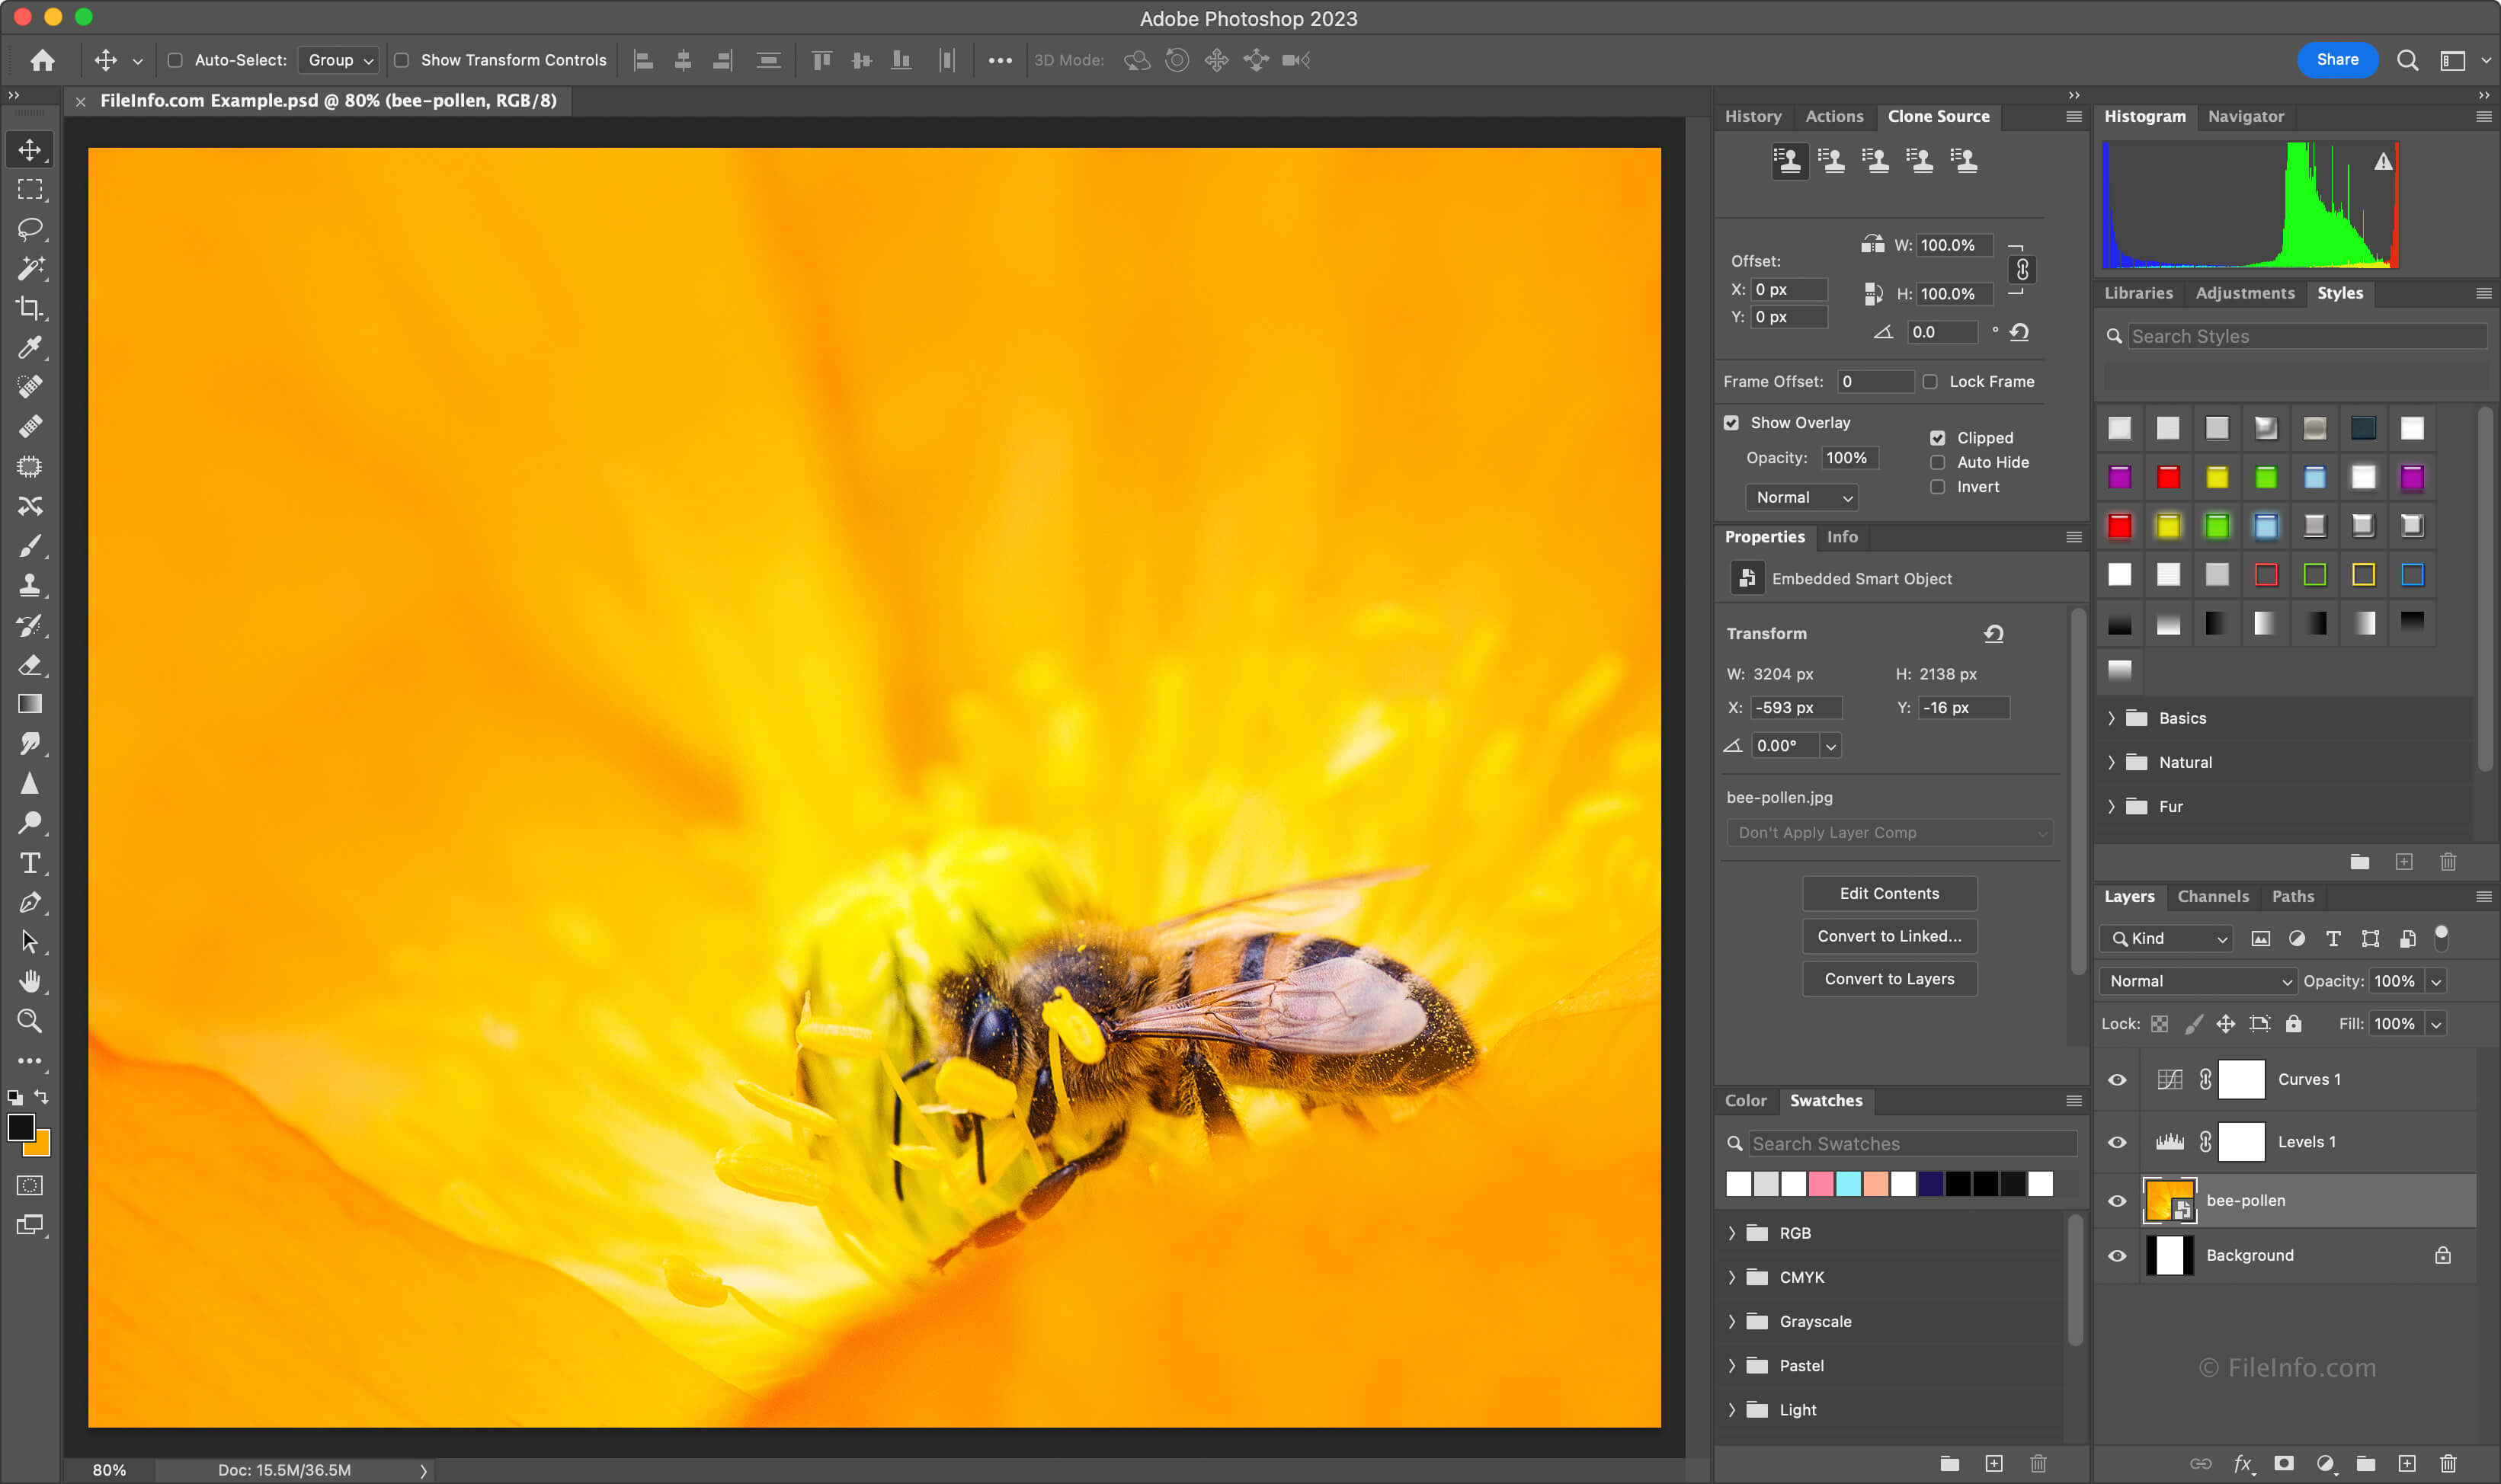 adobe photoshop 2023 download for windows 10